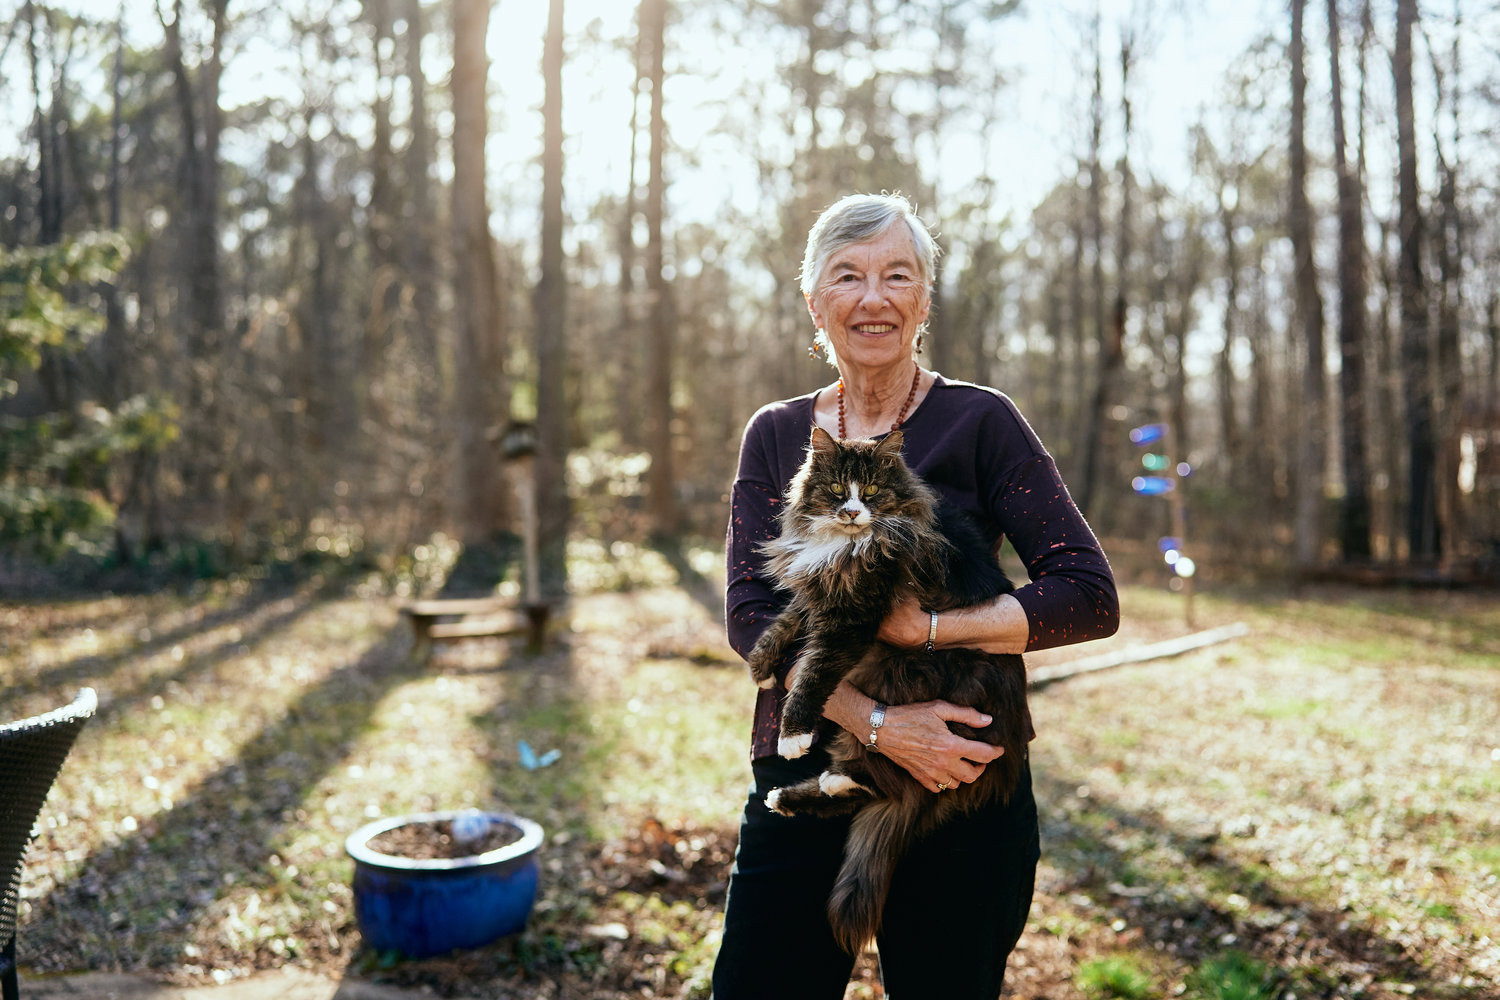 Marcia Herman-Giddens poses at her Chatham County home with her cat, Tuffy. A native of New York, she moved to Alabama in 1946, right before turning 6. In time, she came to understand she was living in the most segregated city in the country. 'The subjugation and inequities were clear to me even as a young child,' she says.